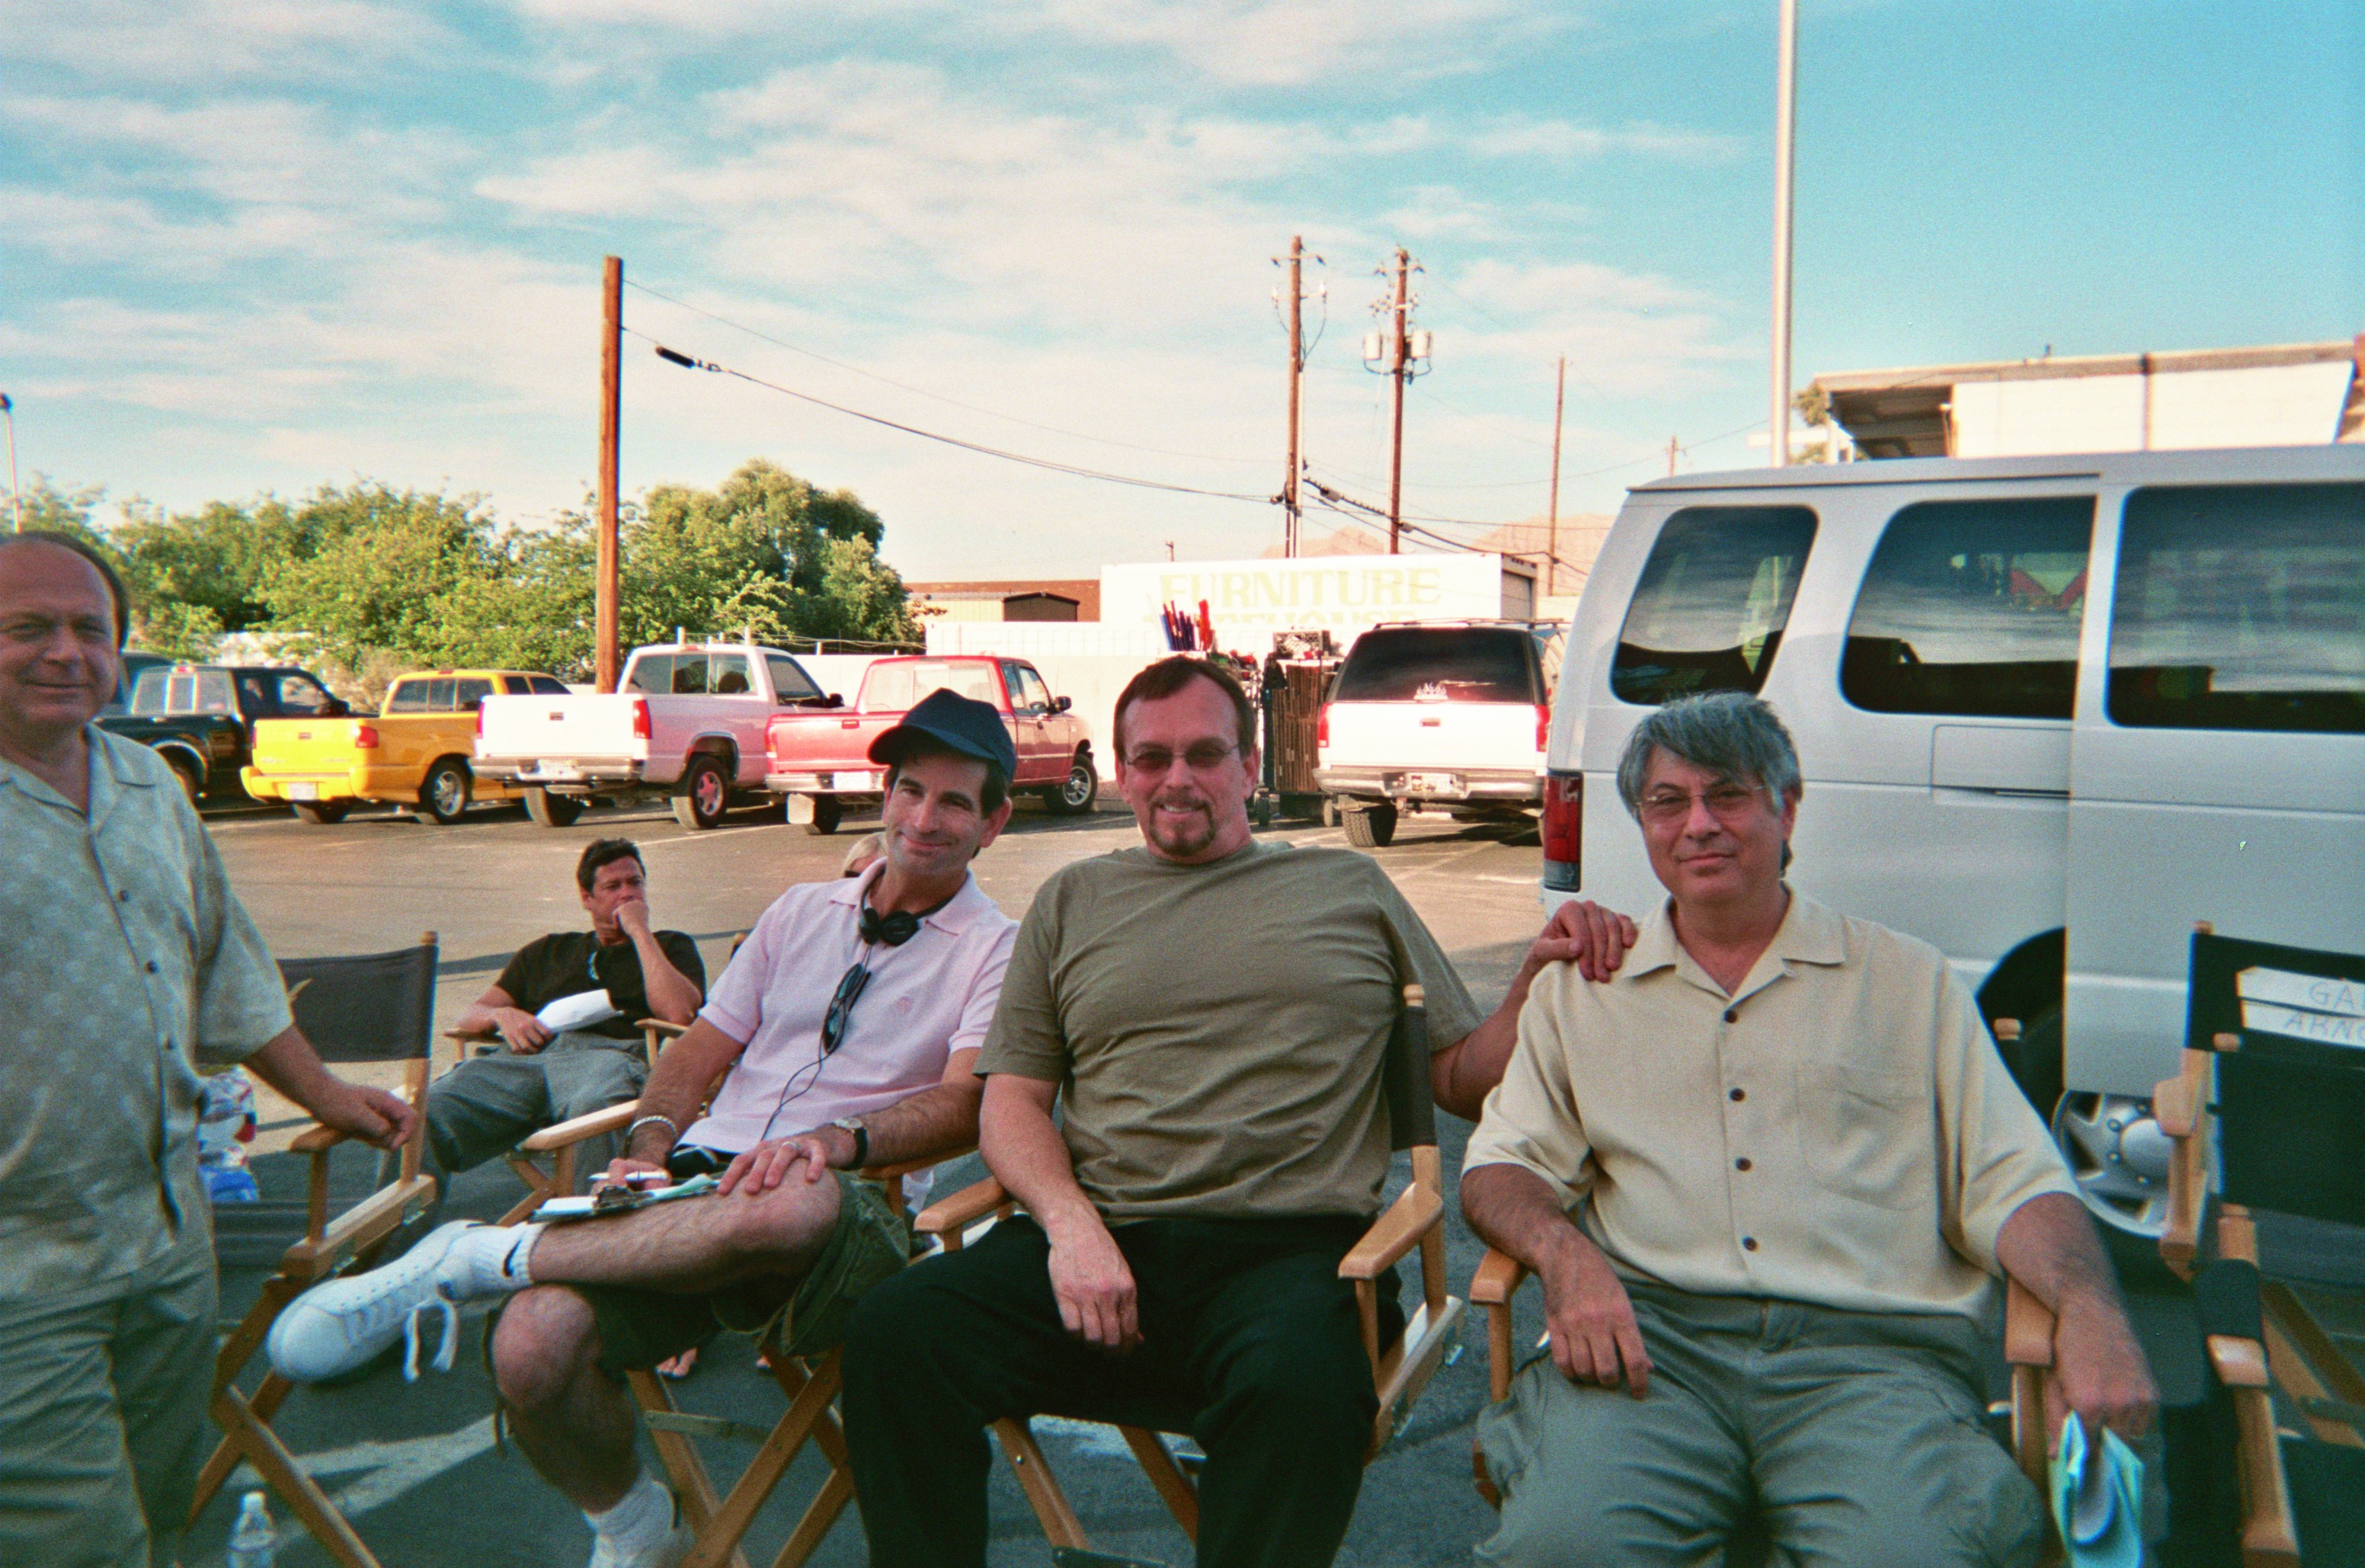 Director Charles Matthau, left, actor Anthony Hornus, center, and producer Michael Meltzer on the Las Vegas set of Mikey and Delores.